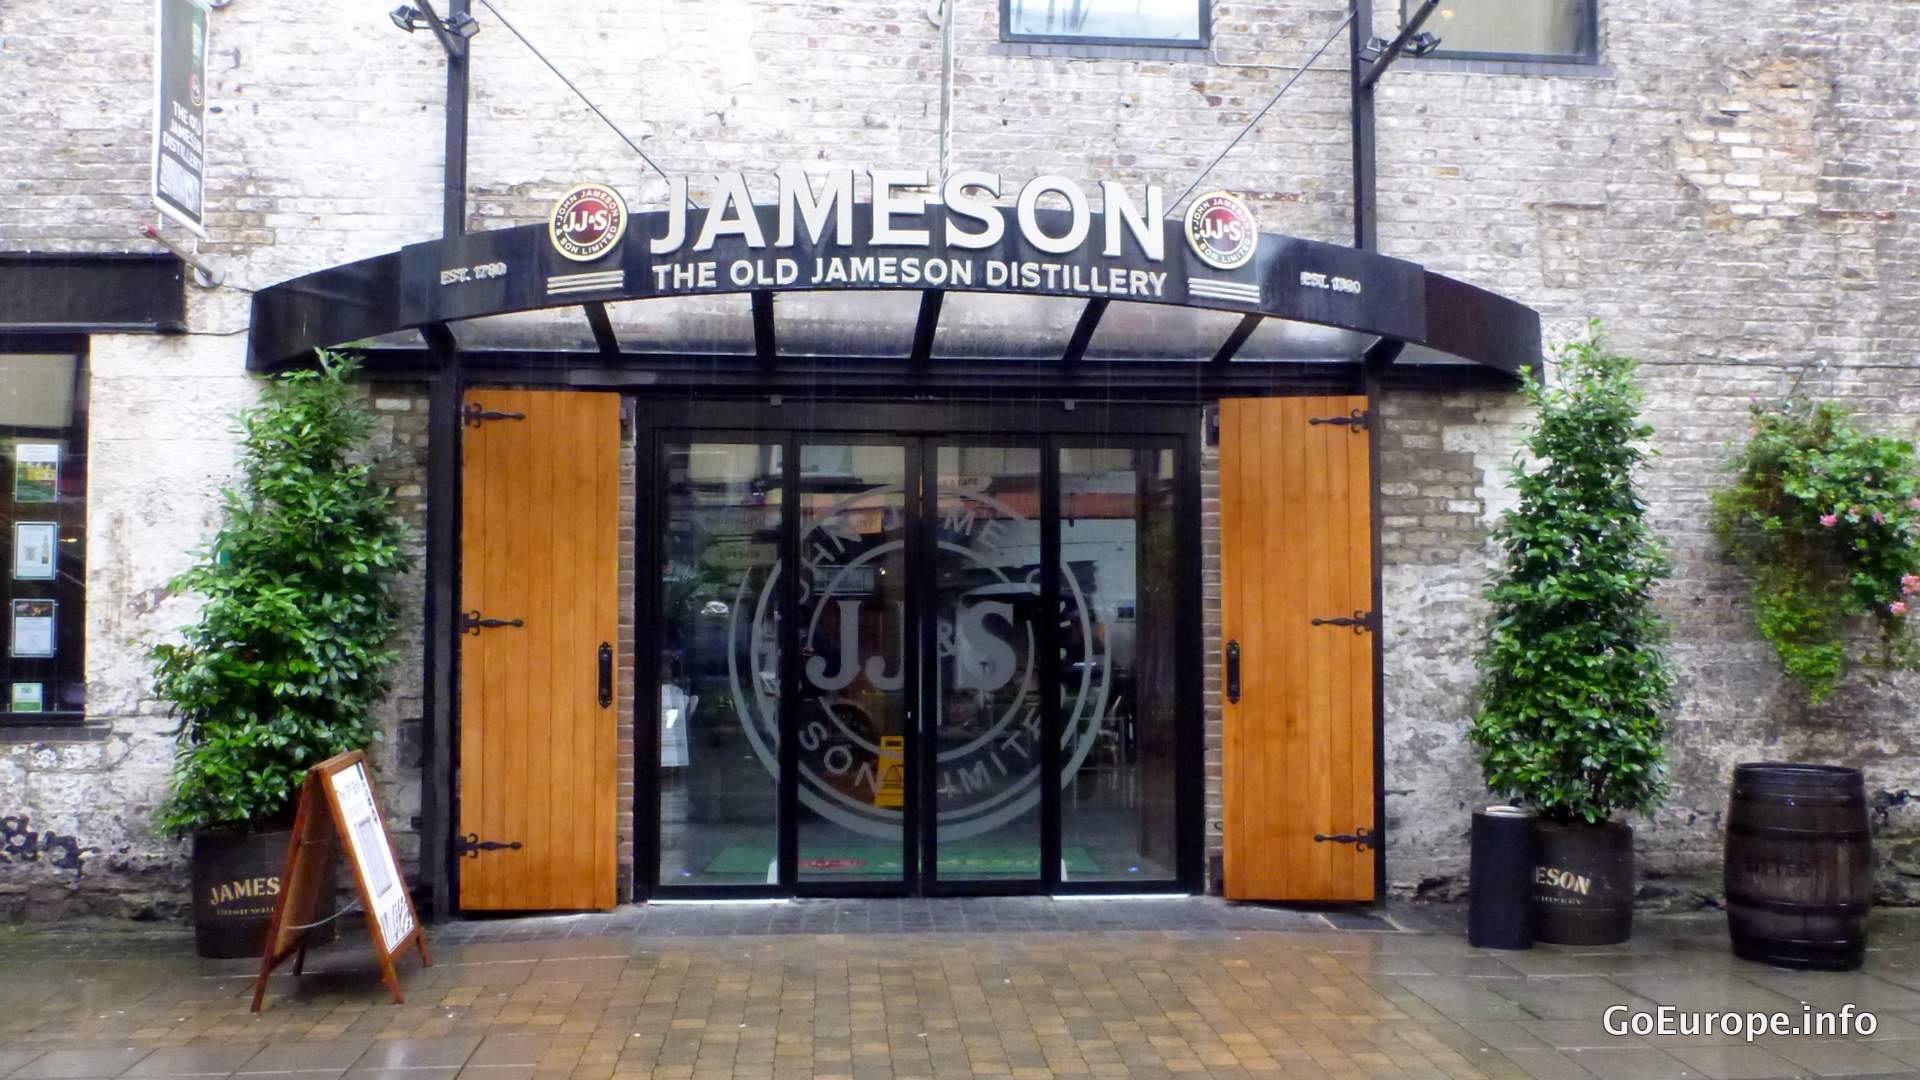 Take a tour and learn about Whisky at Jameson.